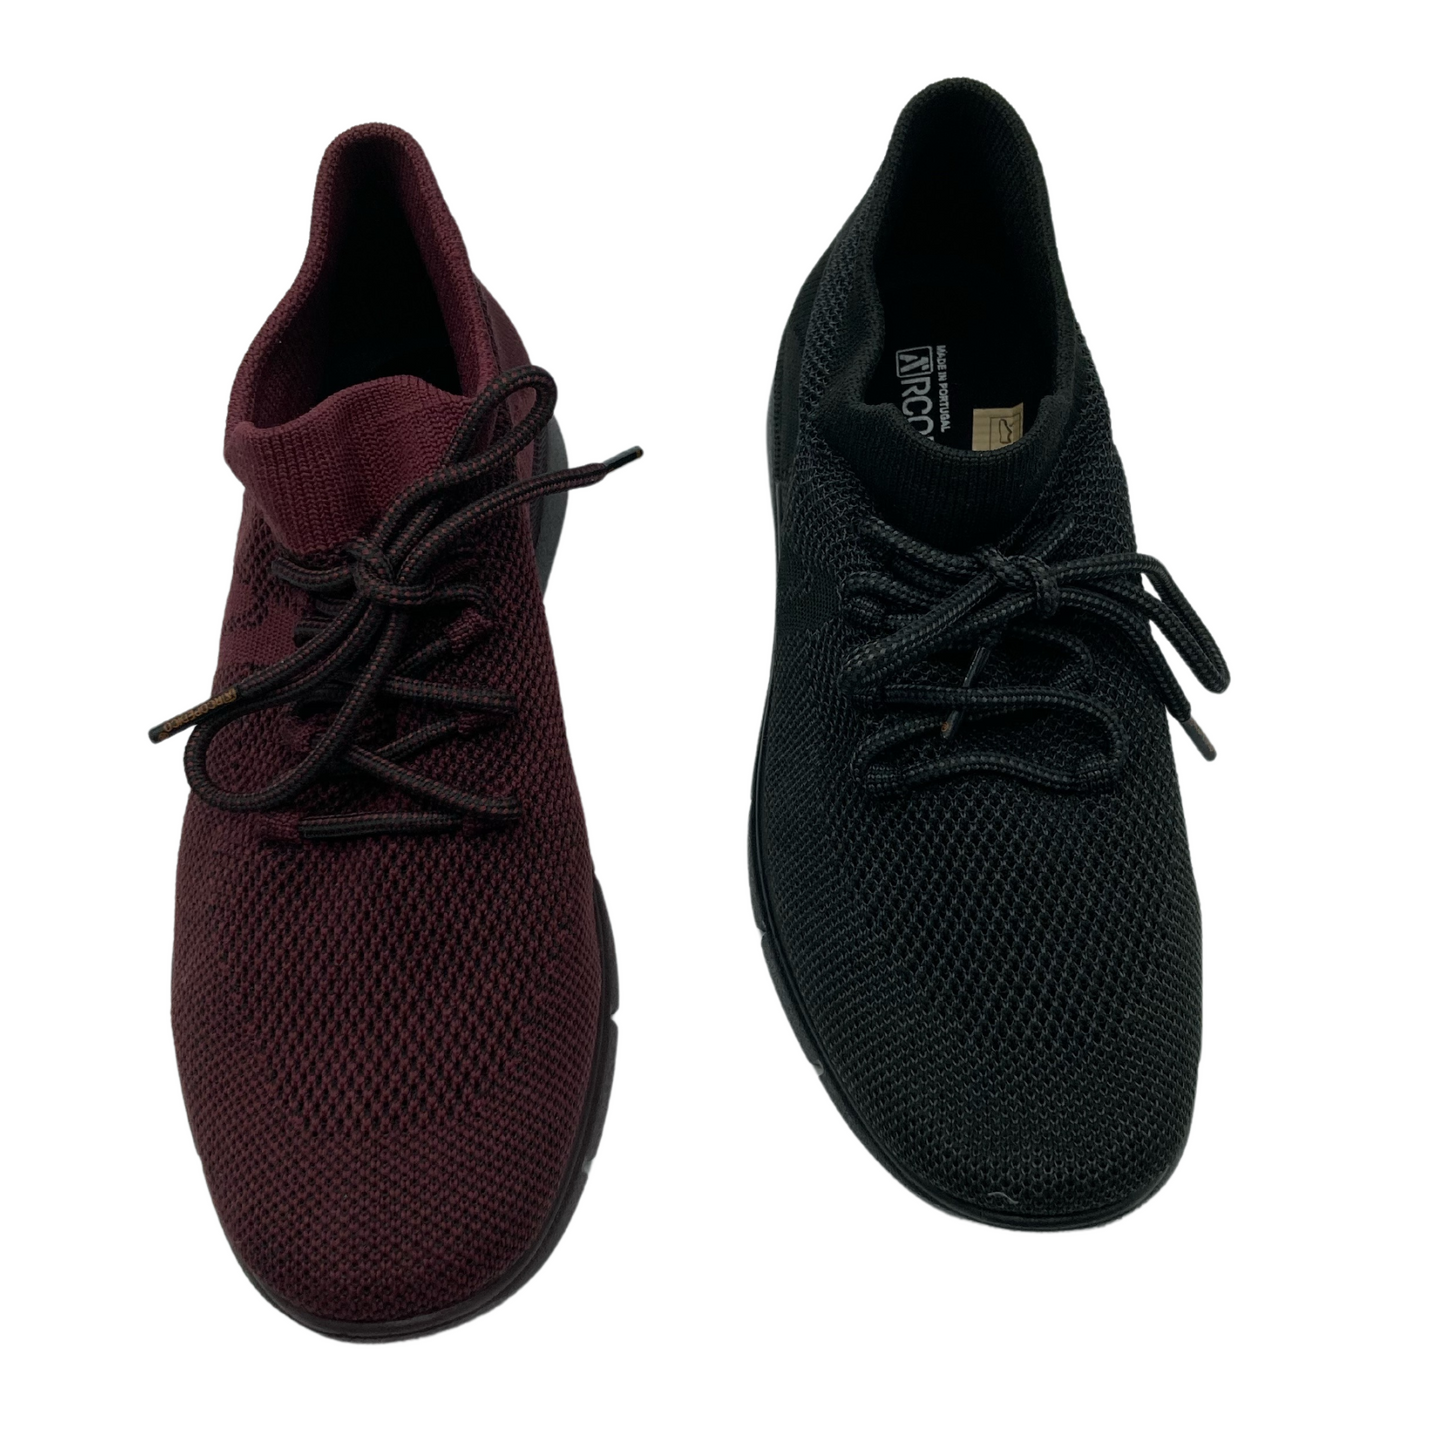 Top view of a pair of mesh sneakers, the one on the left is burgundy and the one on the right is black. Both have matching laces